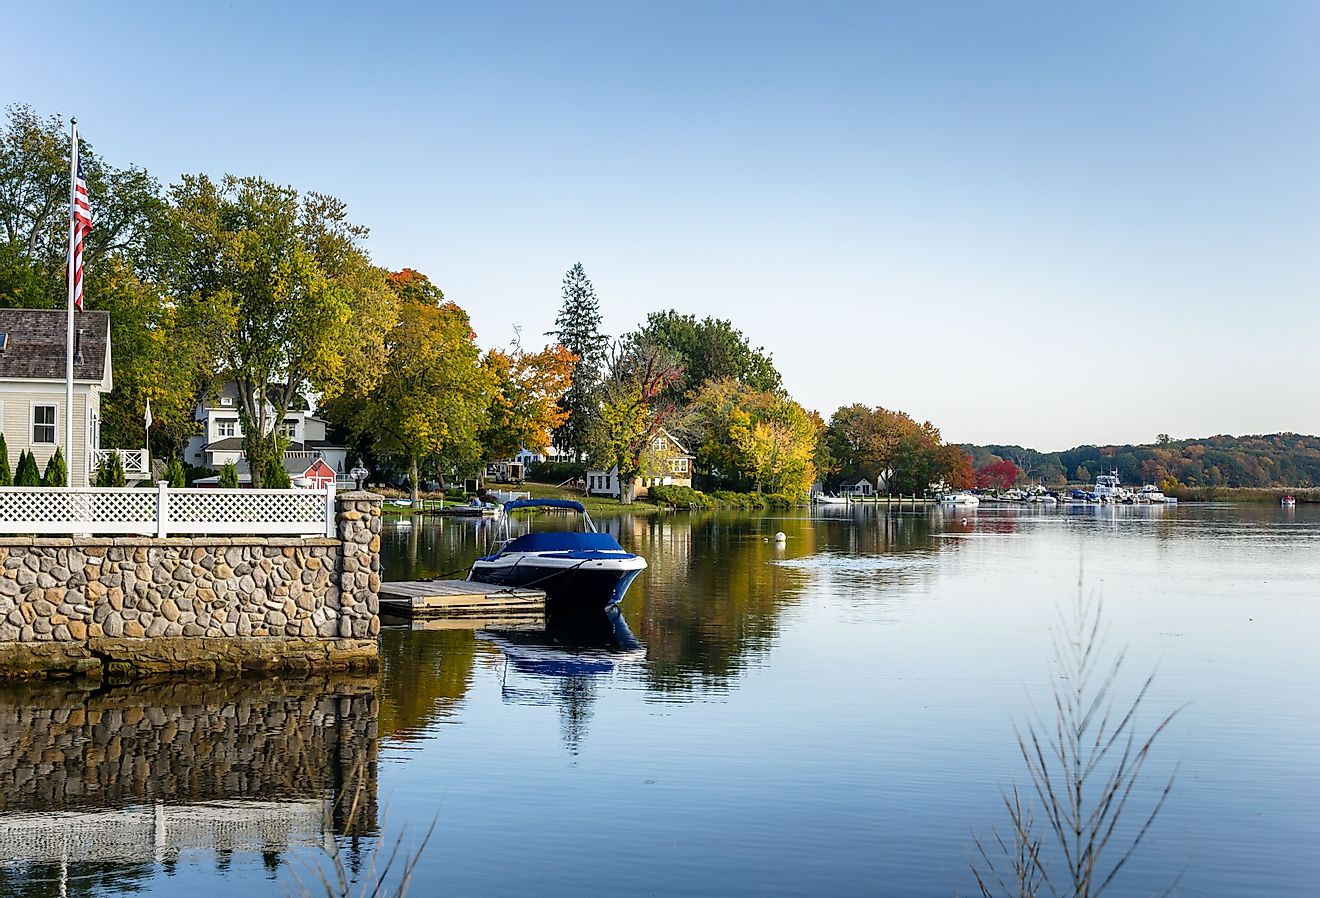 Waterside houses among trees with boats moored to wooden jetties on a clear autumn day, Connecticut River, Essex.